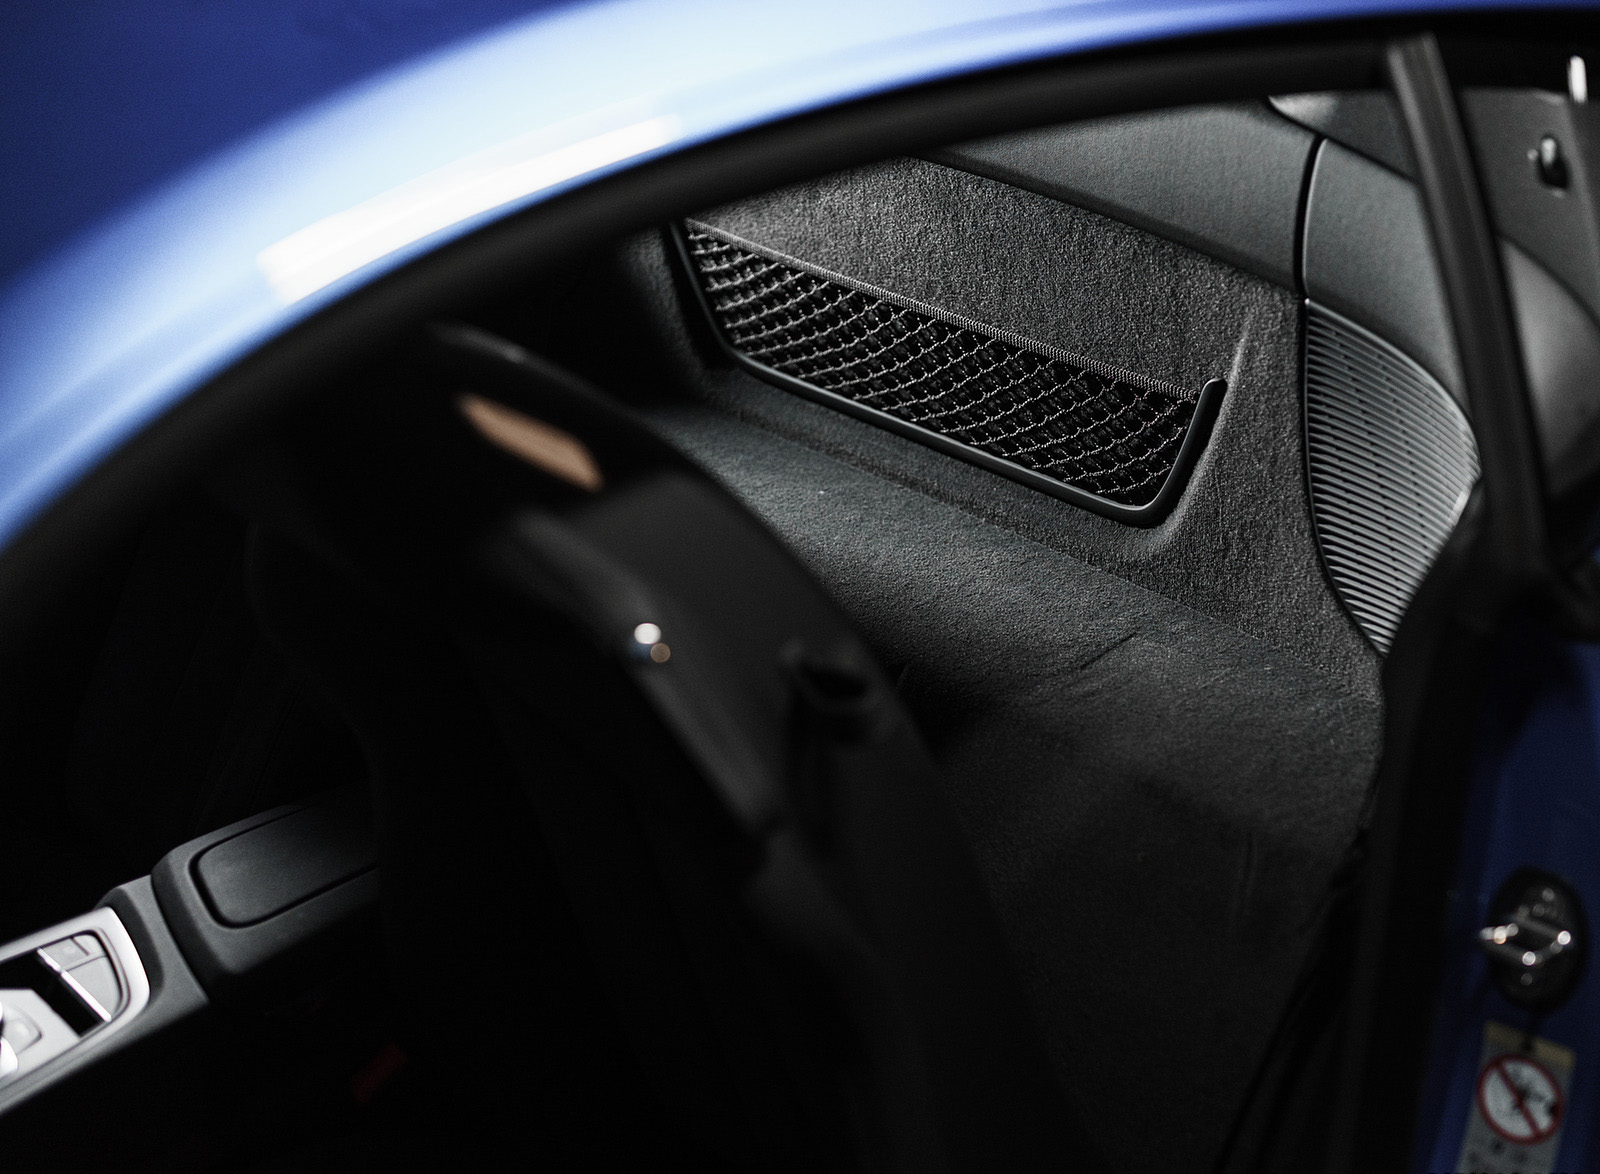 2020 Audi R8 V10 RWD Coupe (UK-Spec) Interior Detail Wallpapers #146 of 151